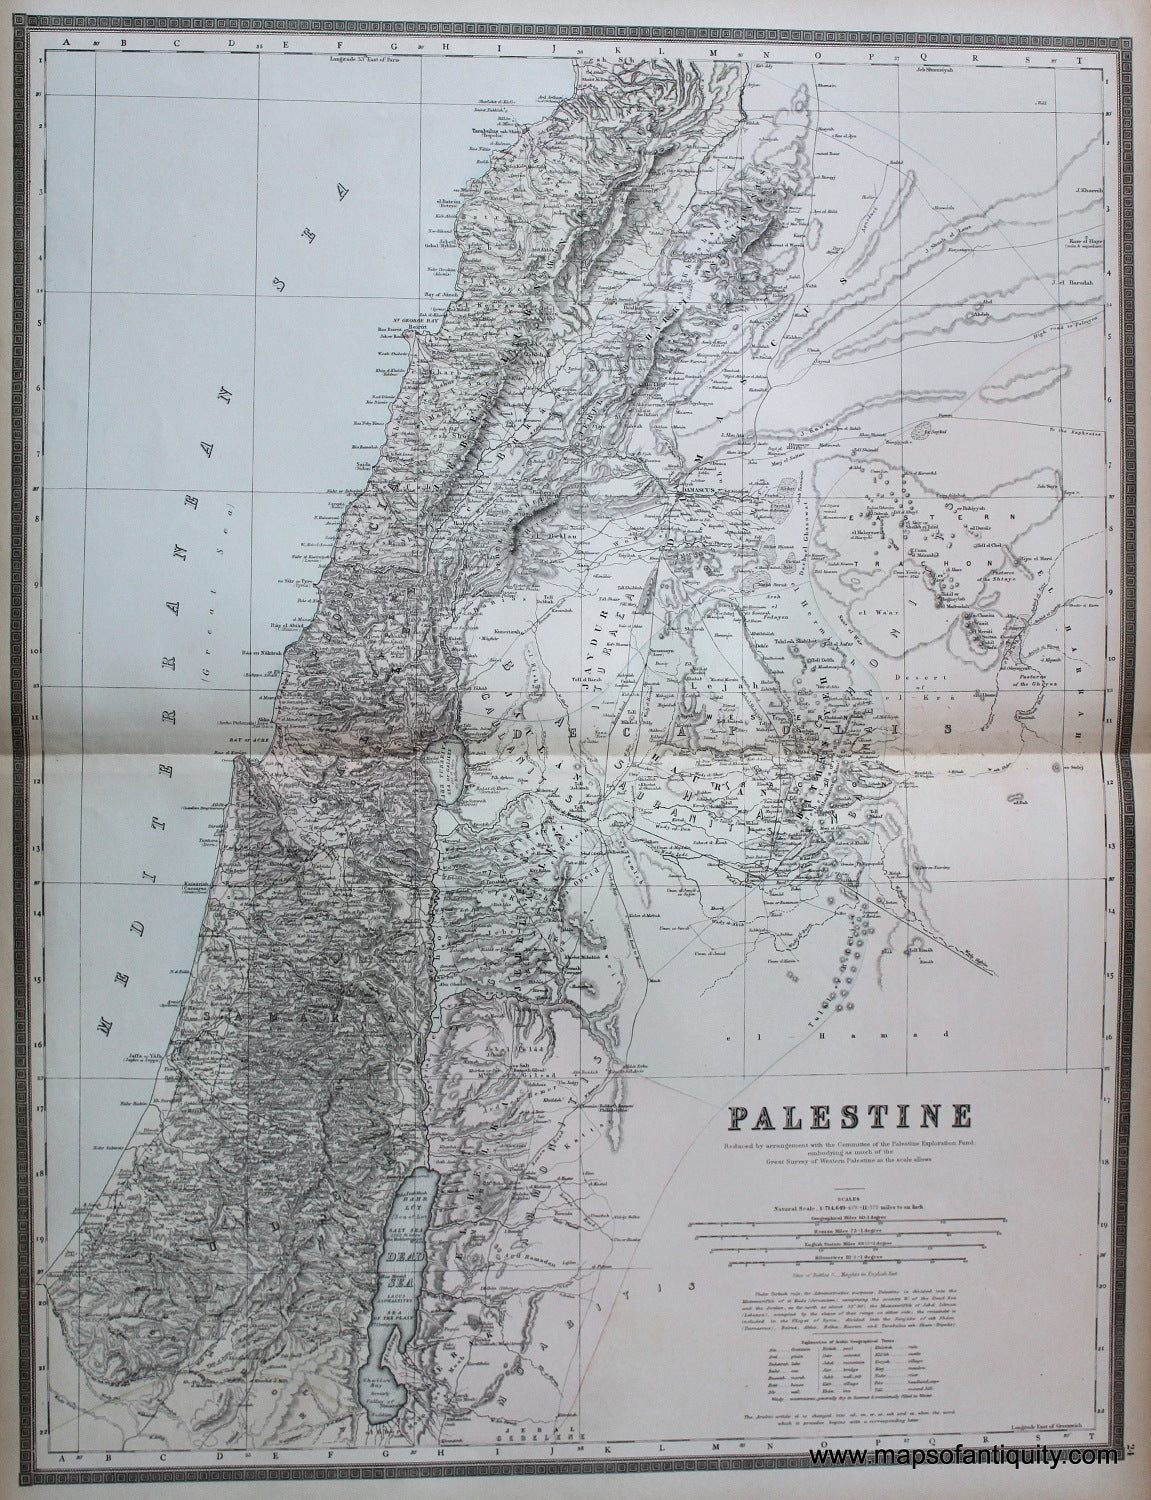 Antique-Hand-Colored-Map-Palestine--Reduced-by-arrangement-with-the-Committee-of-the-Palestine-Exploration-Fund-embodying-as-much-of-the-Great-Survey-of-Western-Palestine-as-the-scale-allows.-******-Middle-East-&-Holy-Land-Palestine-1887-Bradley-Maps-Of-Antiquity